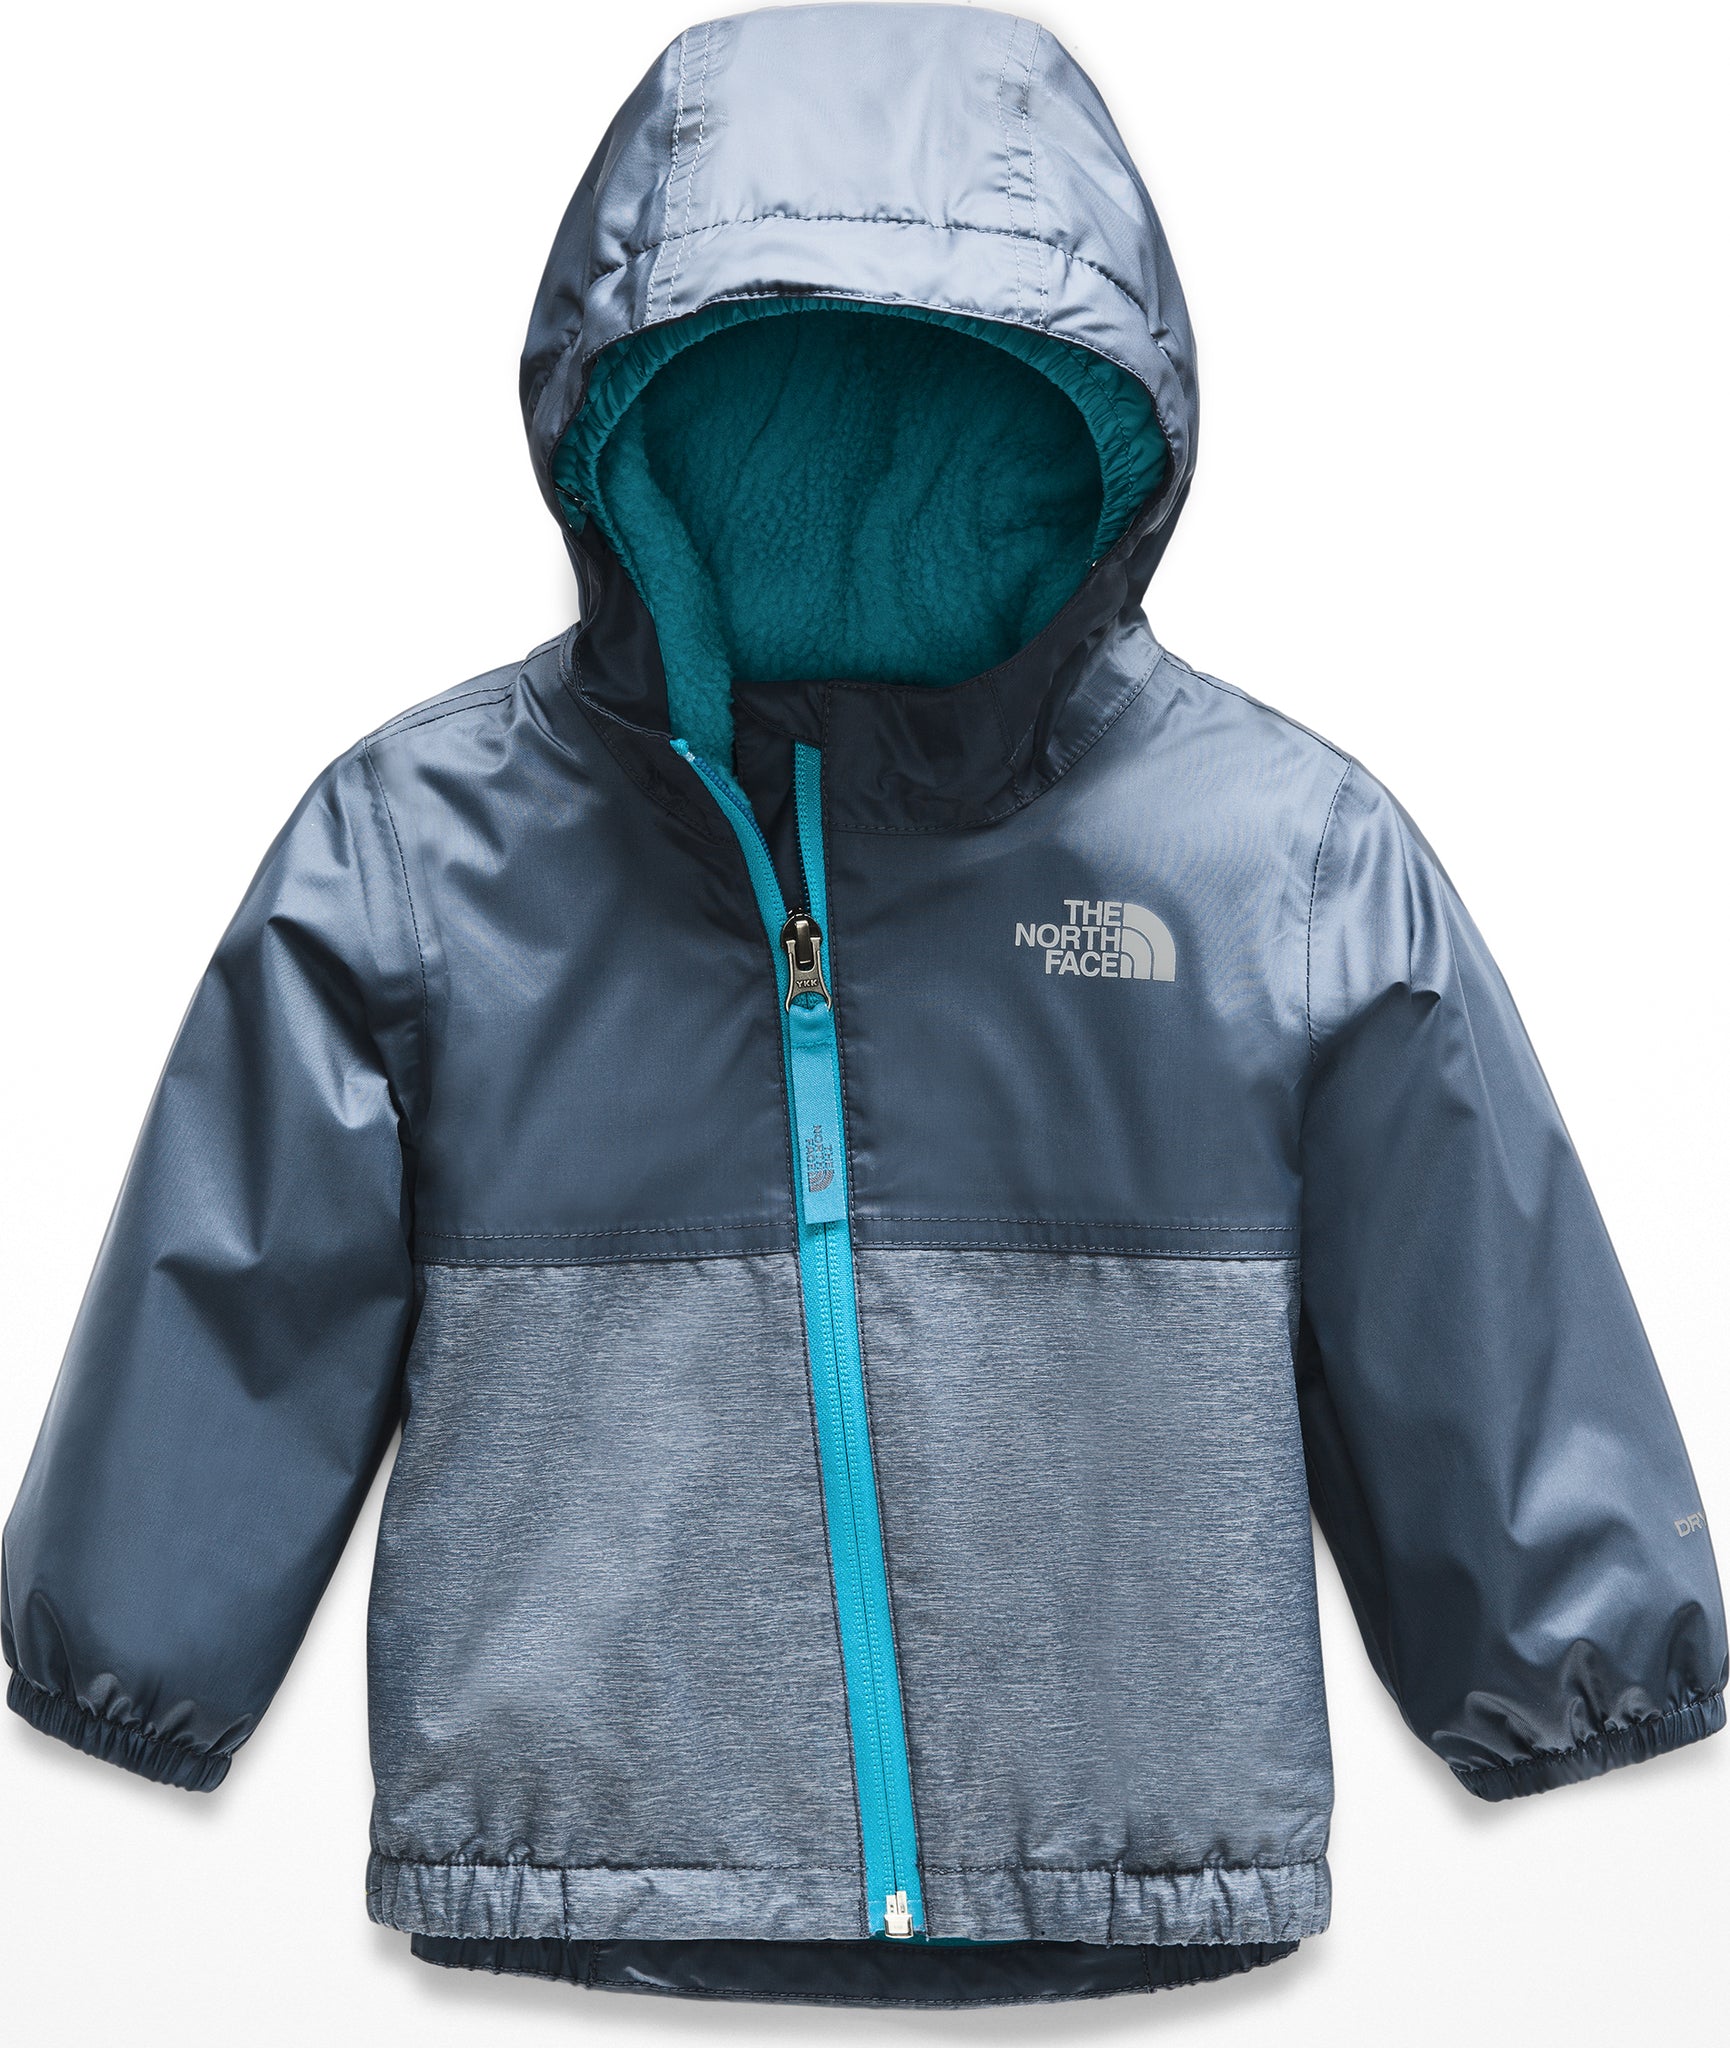 The North Face Warm Storm Jacket 